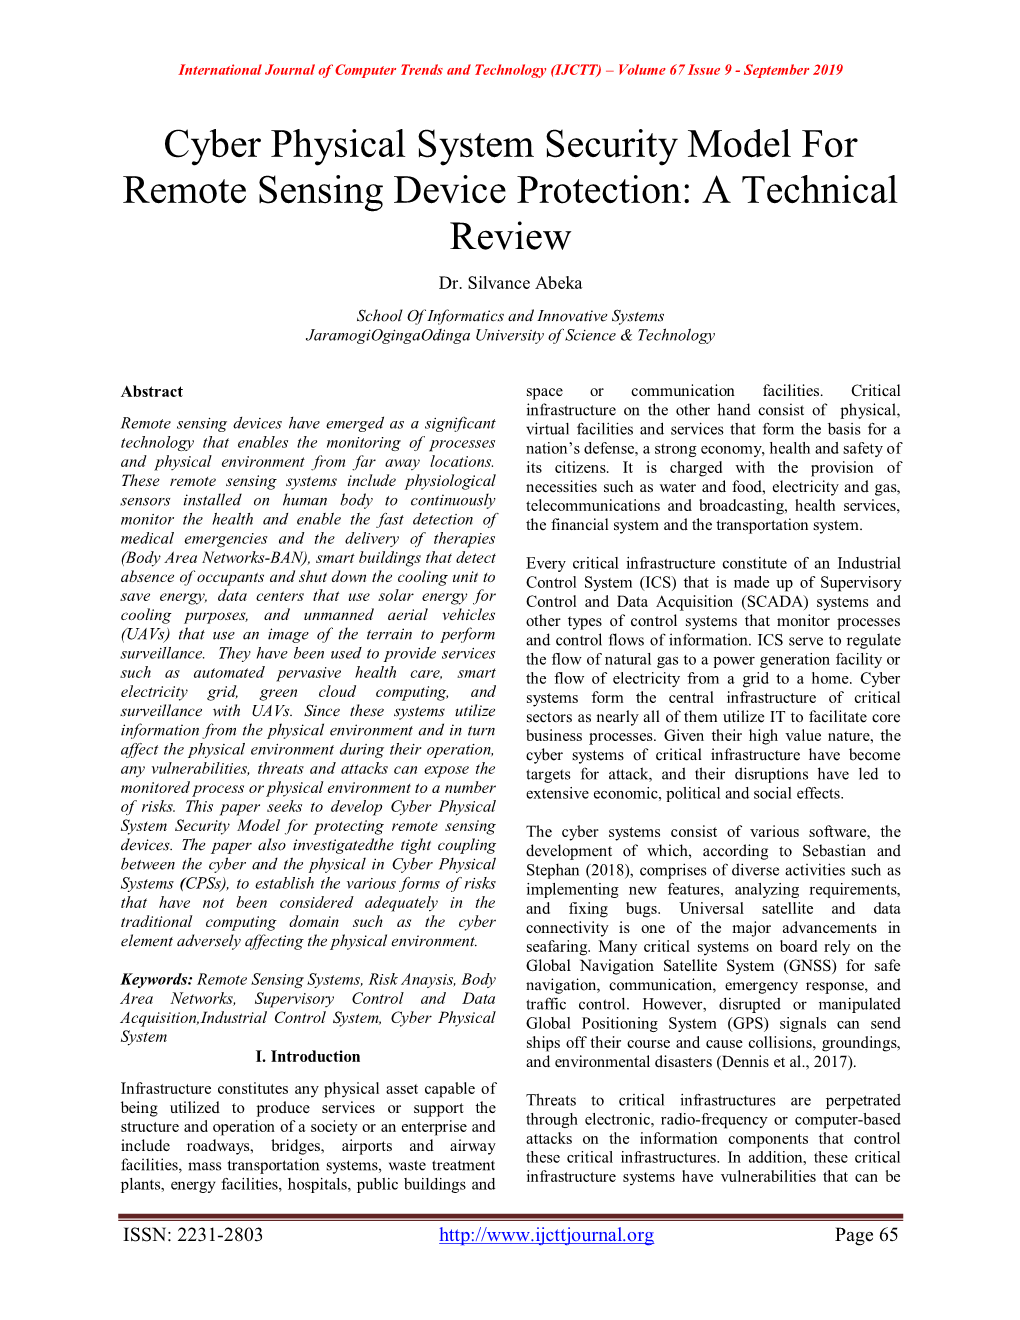 Cyber Physical System Security Model for Remote Sensing Device Protection: a Technical Review Dr